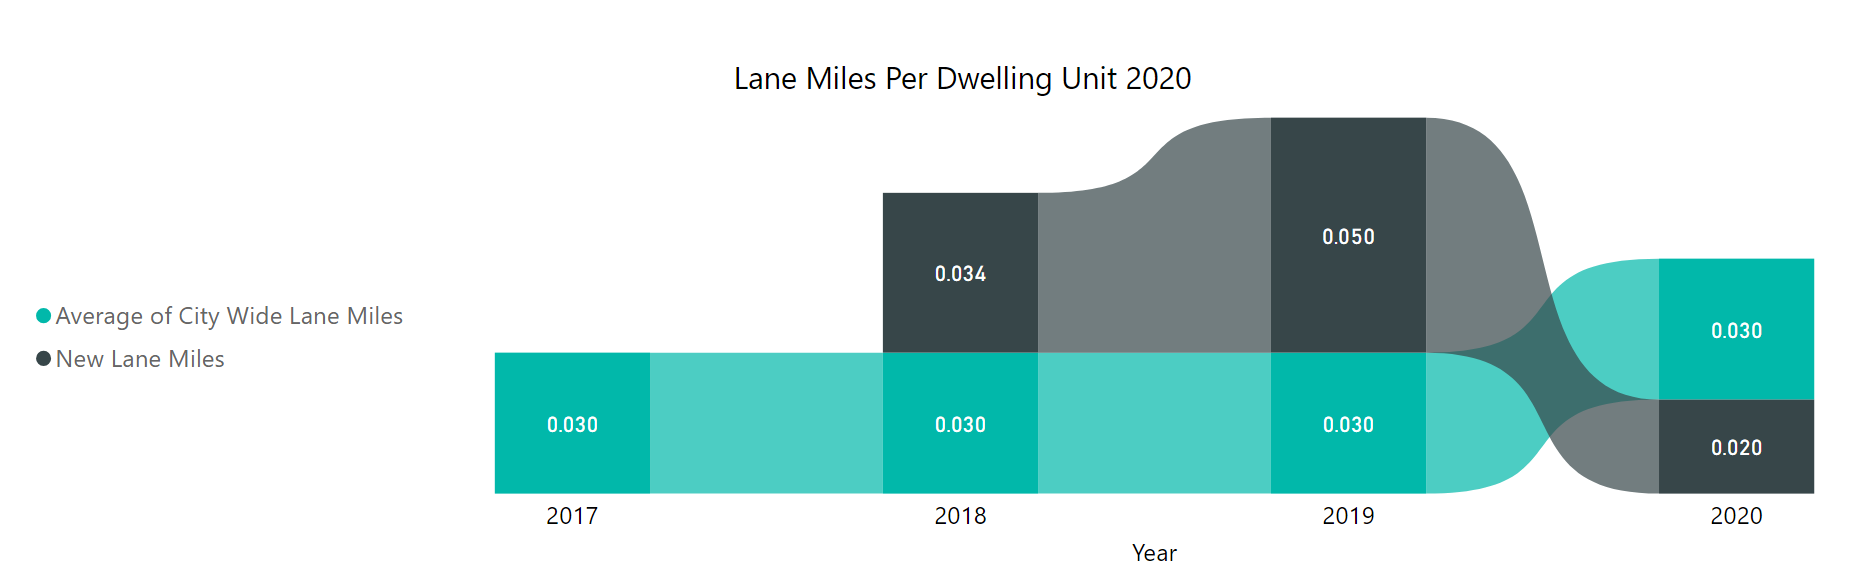 lane miles per dwelling unit from 2017 to 2020, the average of city wide lanes miles has remained consistent. New lane miles increased in 2018 and 2019 and decreased in 2020.